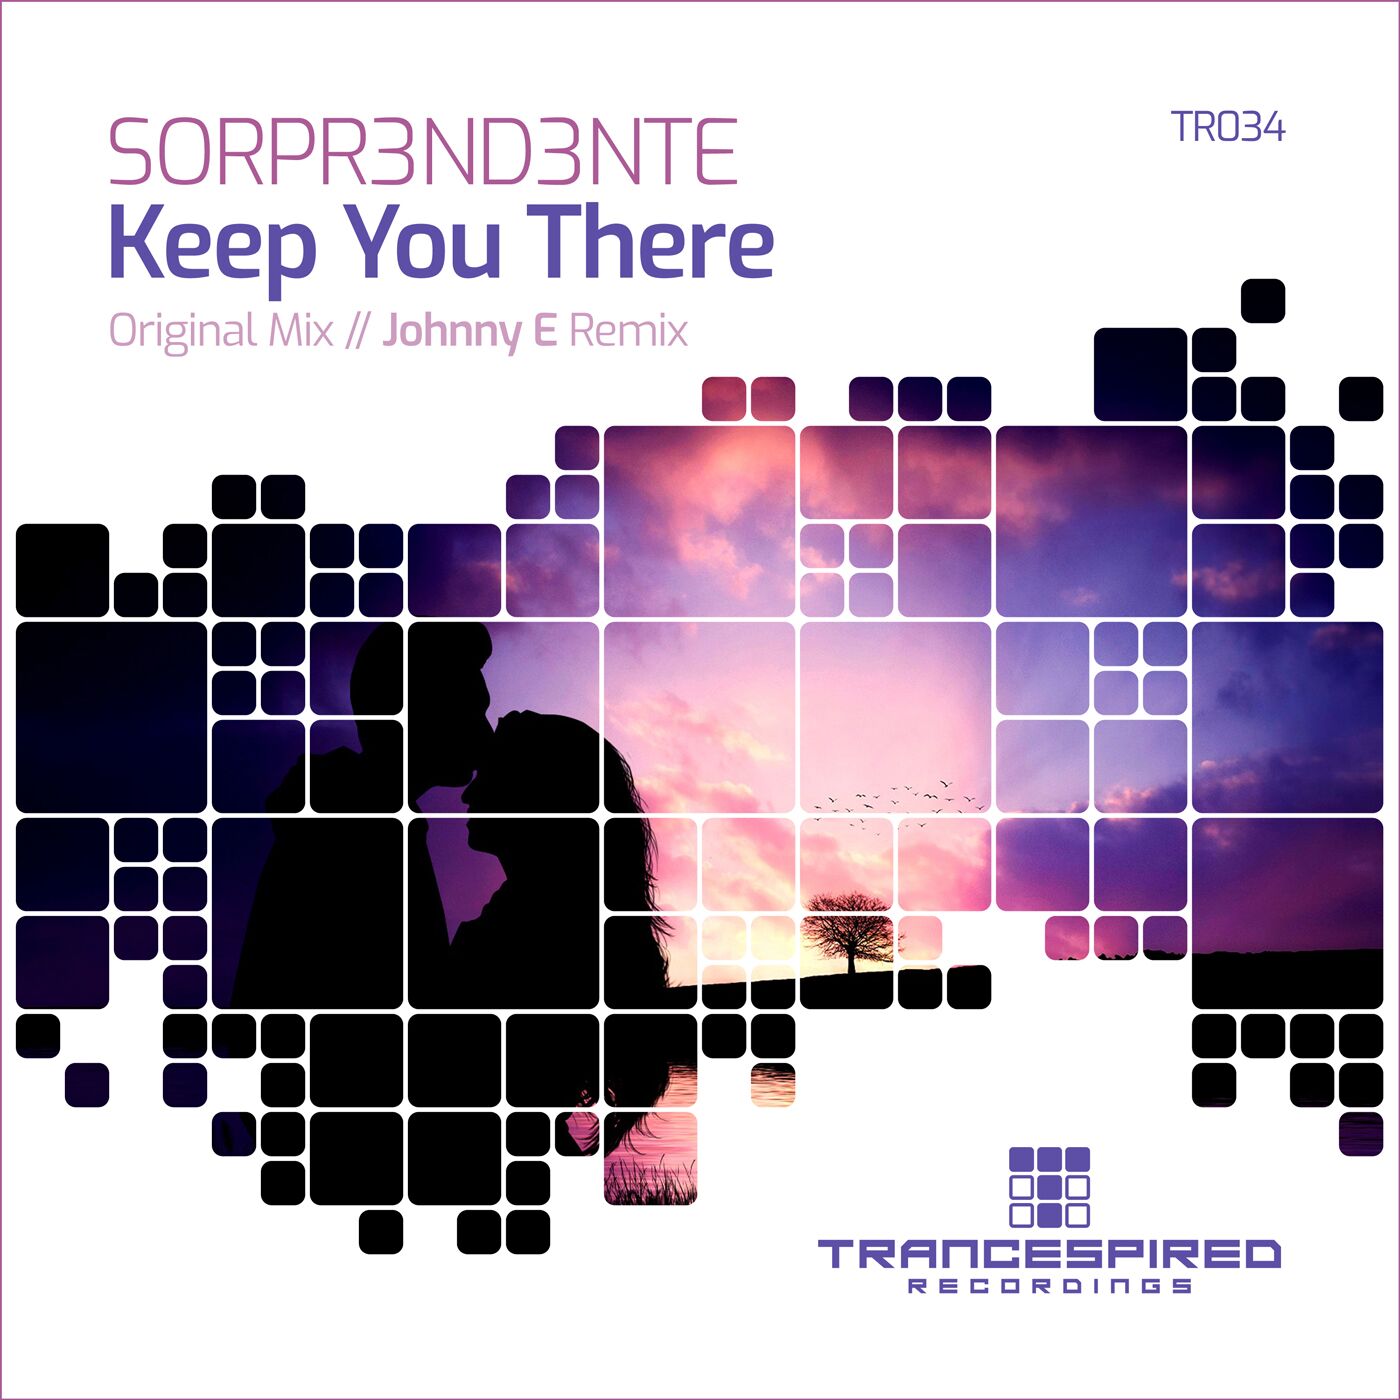 SORPR3ND3NTE presents Keep You There on Trancespired Recordings